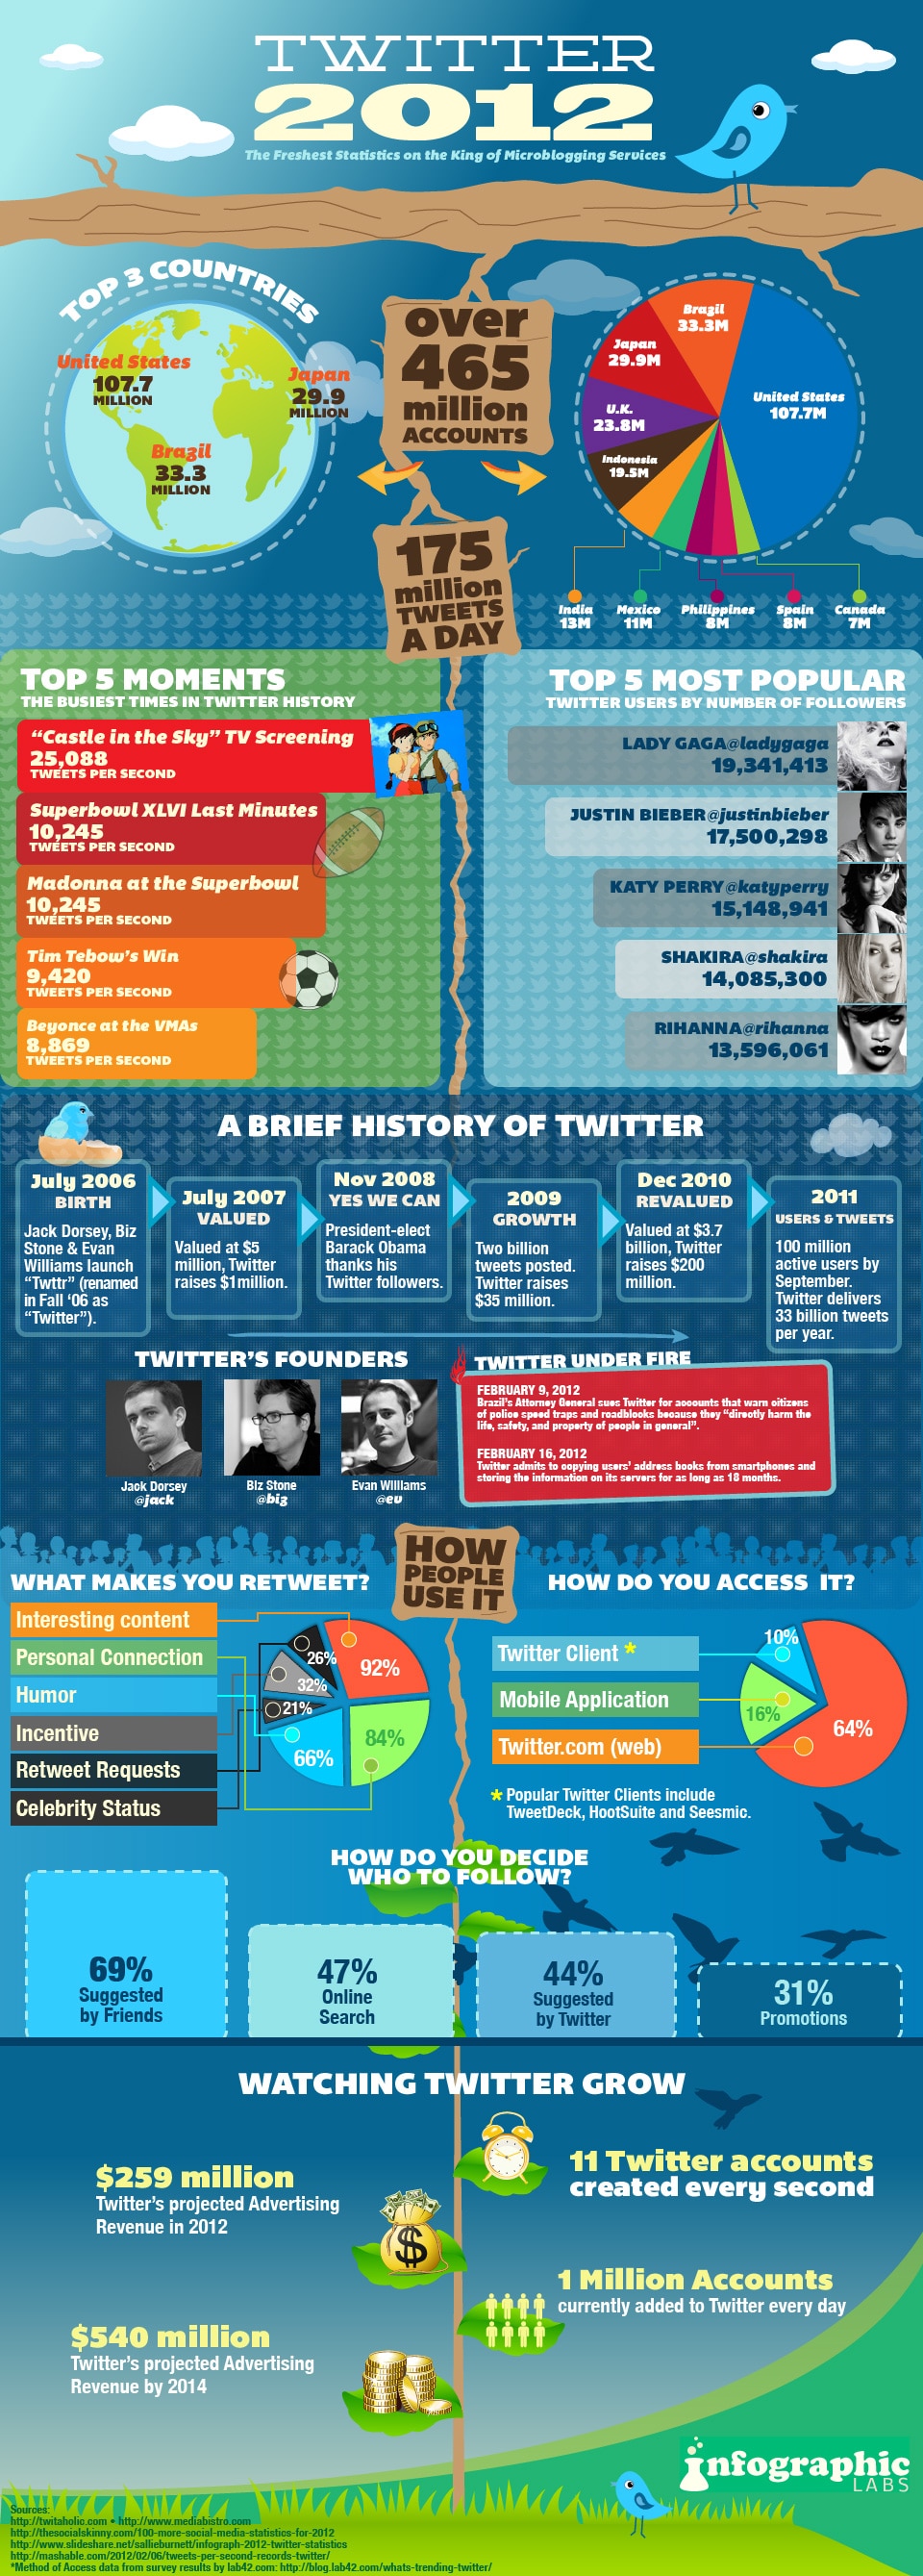 twitter-2012-facts-infographic